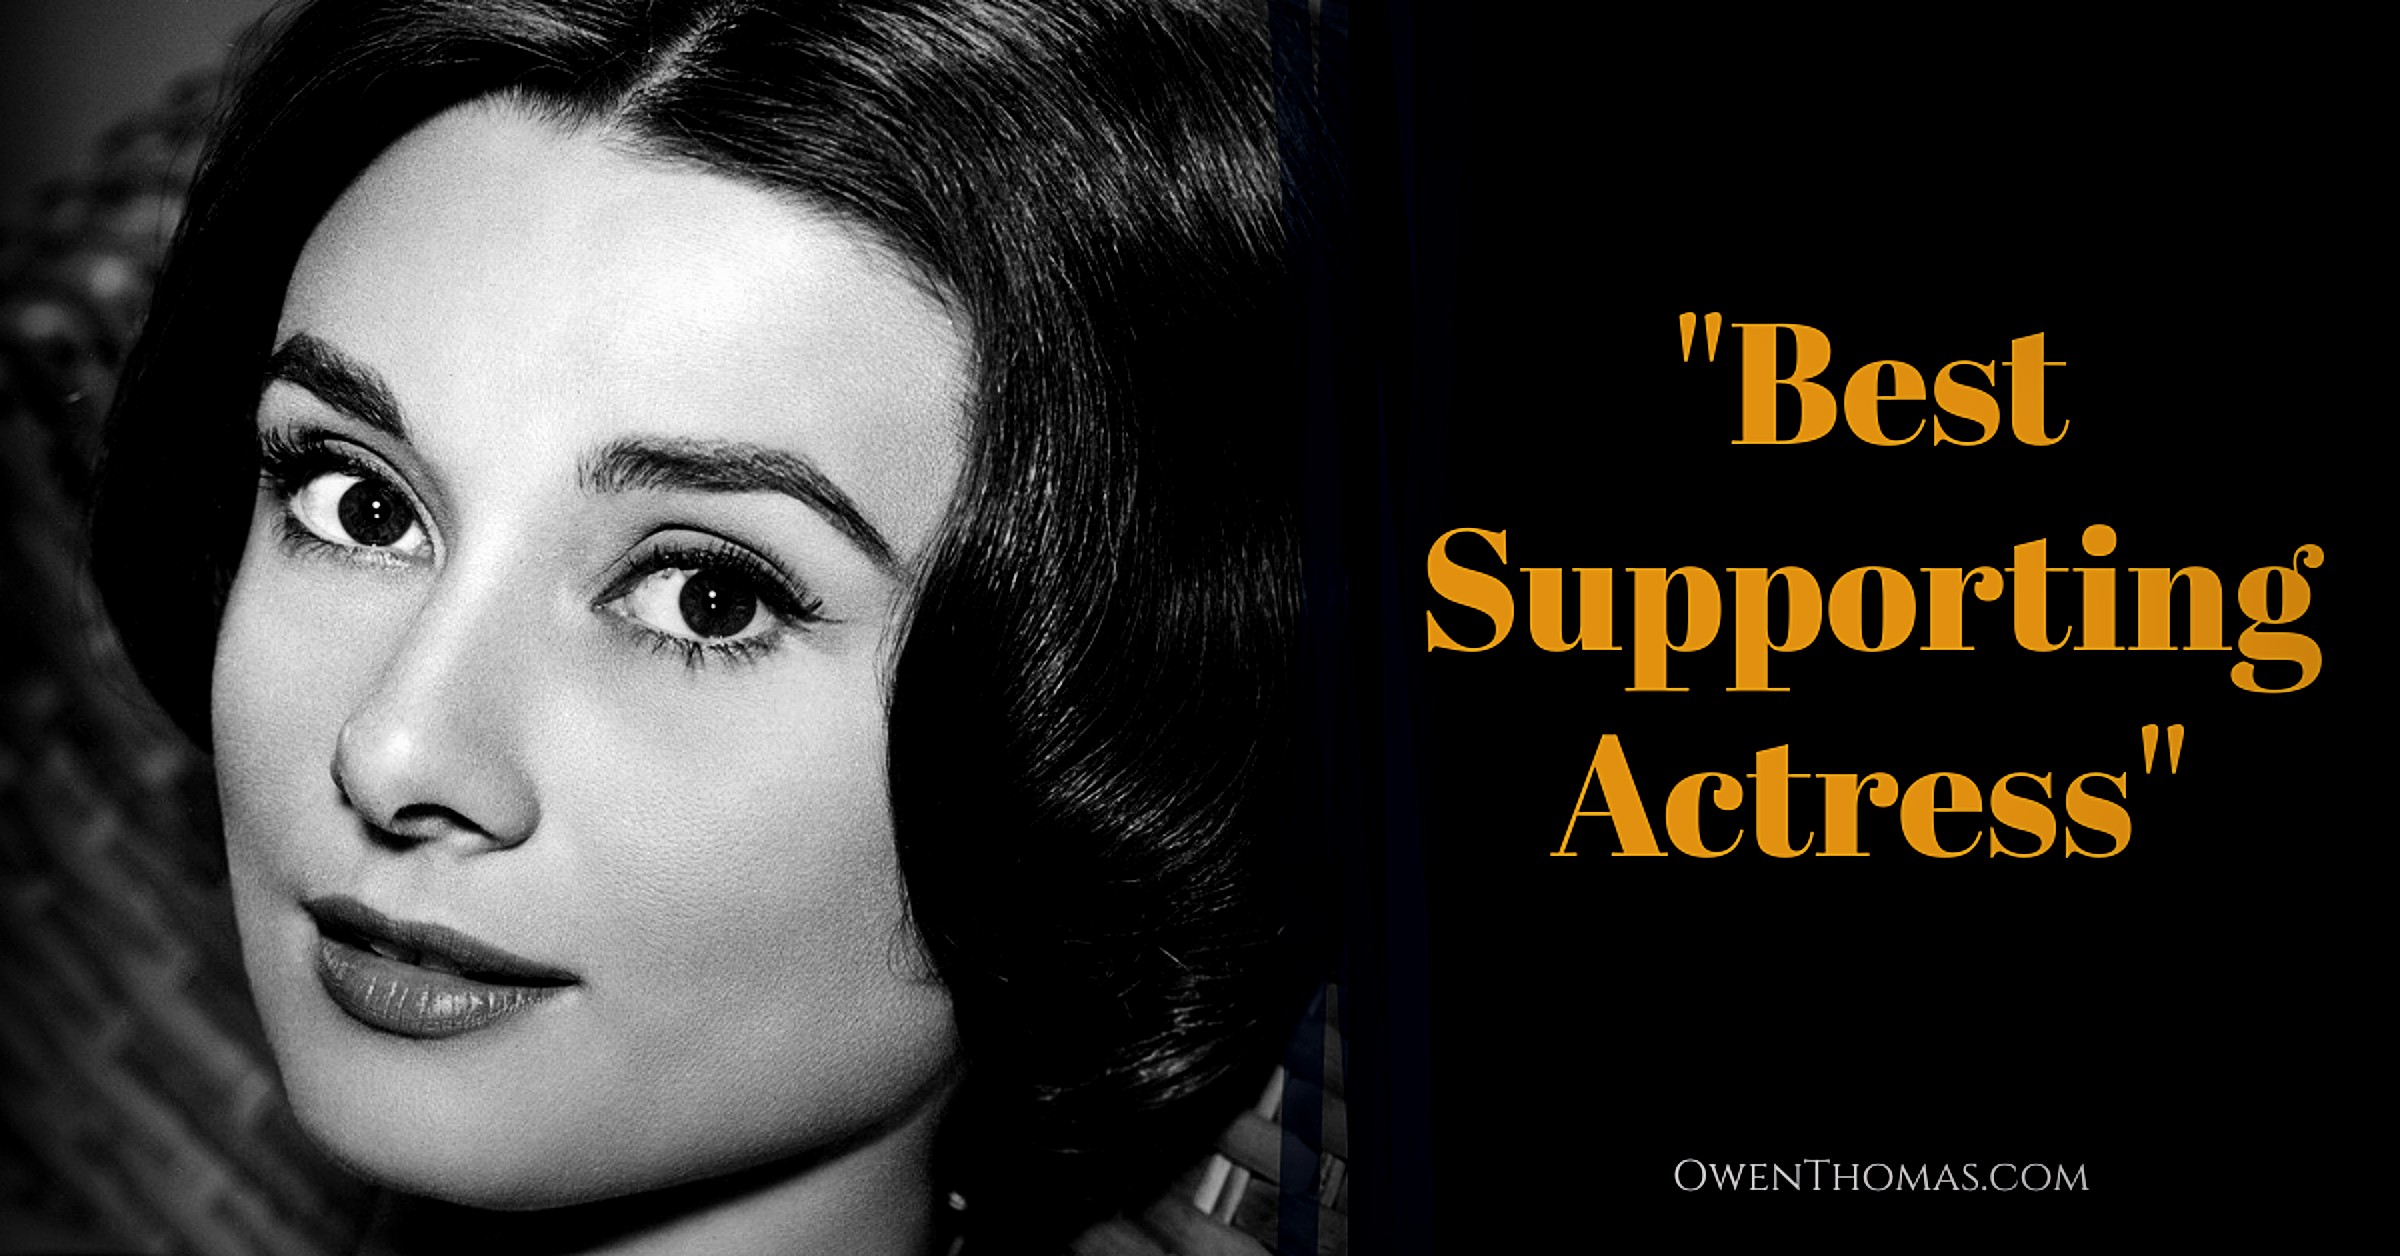 You are currently viewing “Best Supporting Actress”